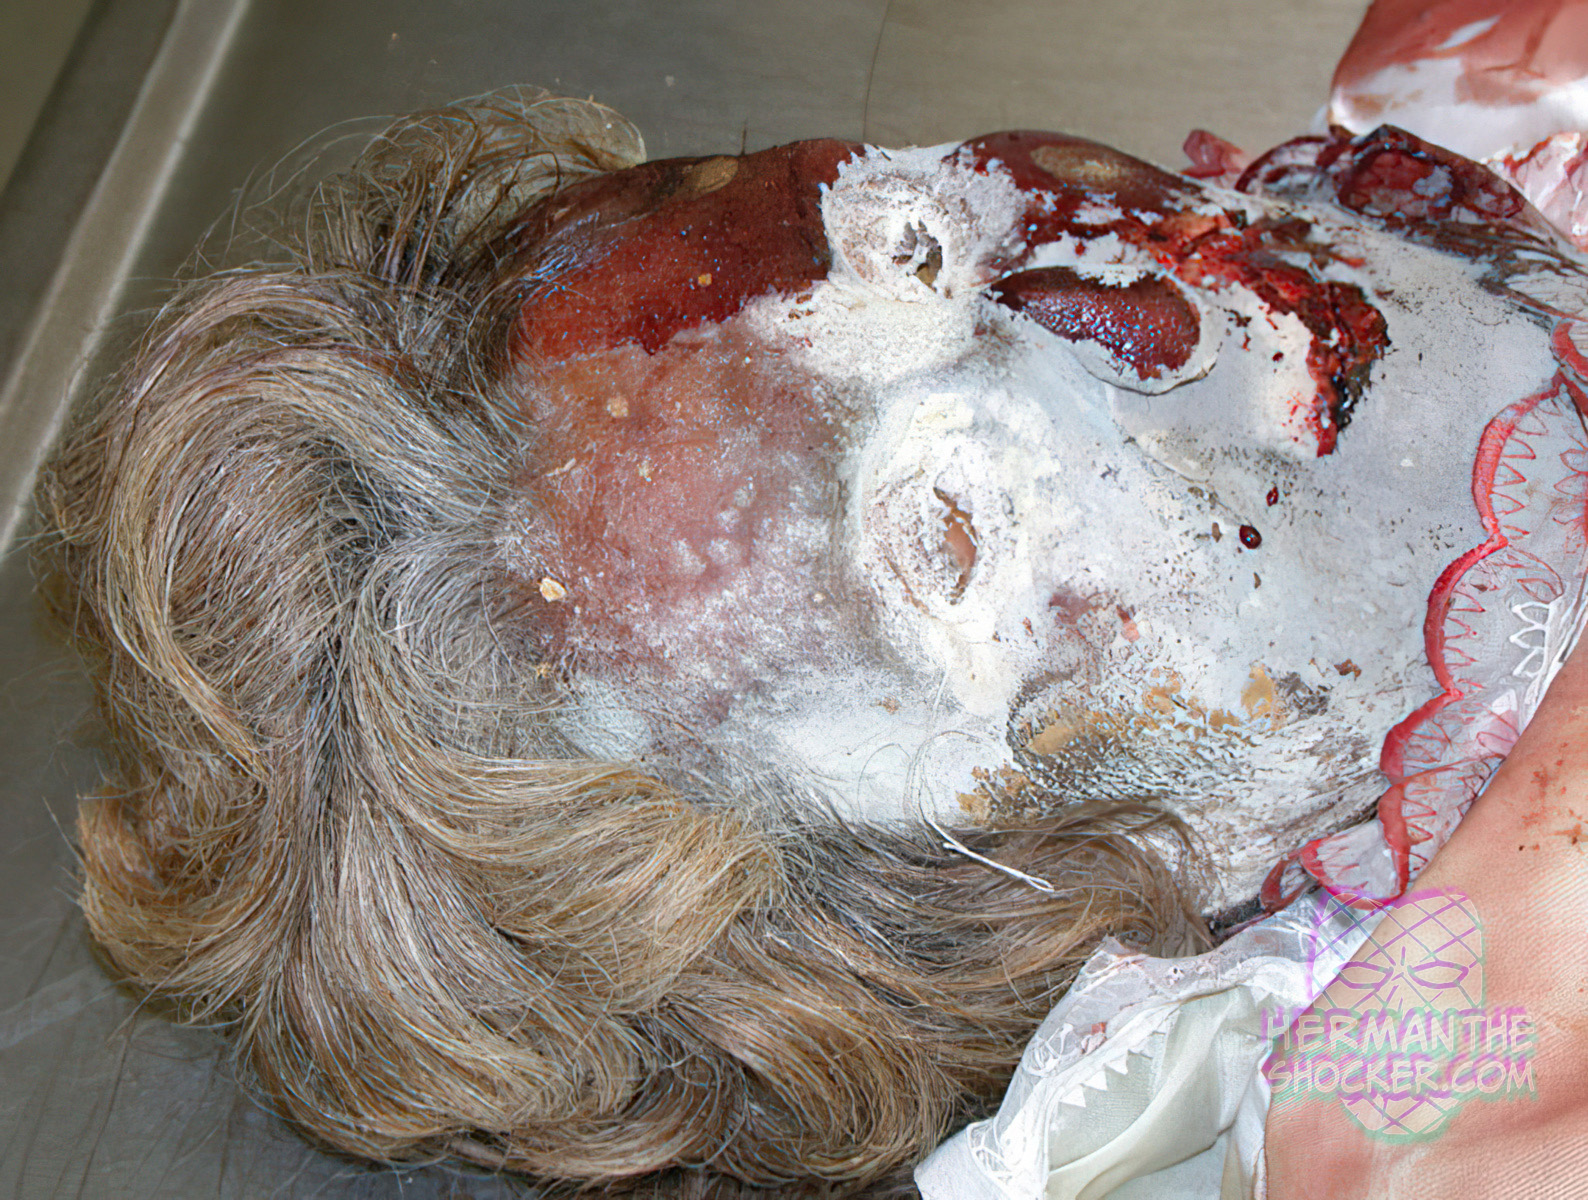 Extensive whitish-gray fungal colonization on corpse’s face